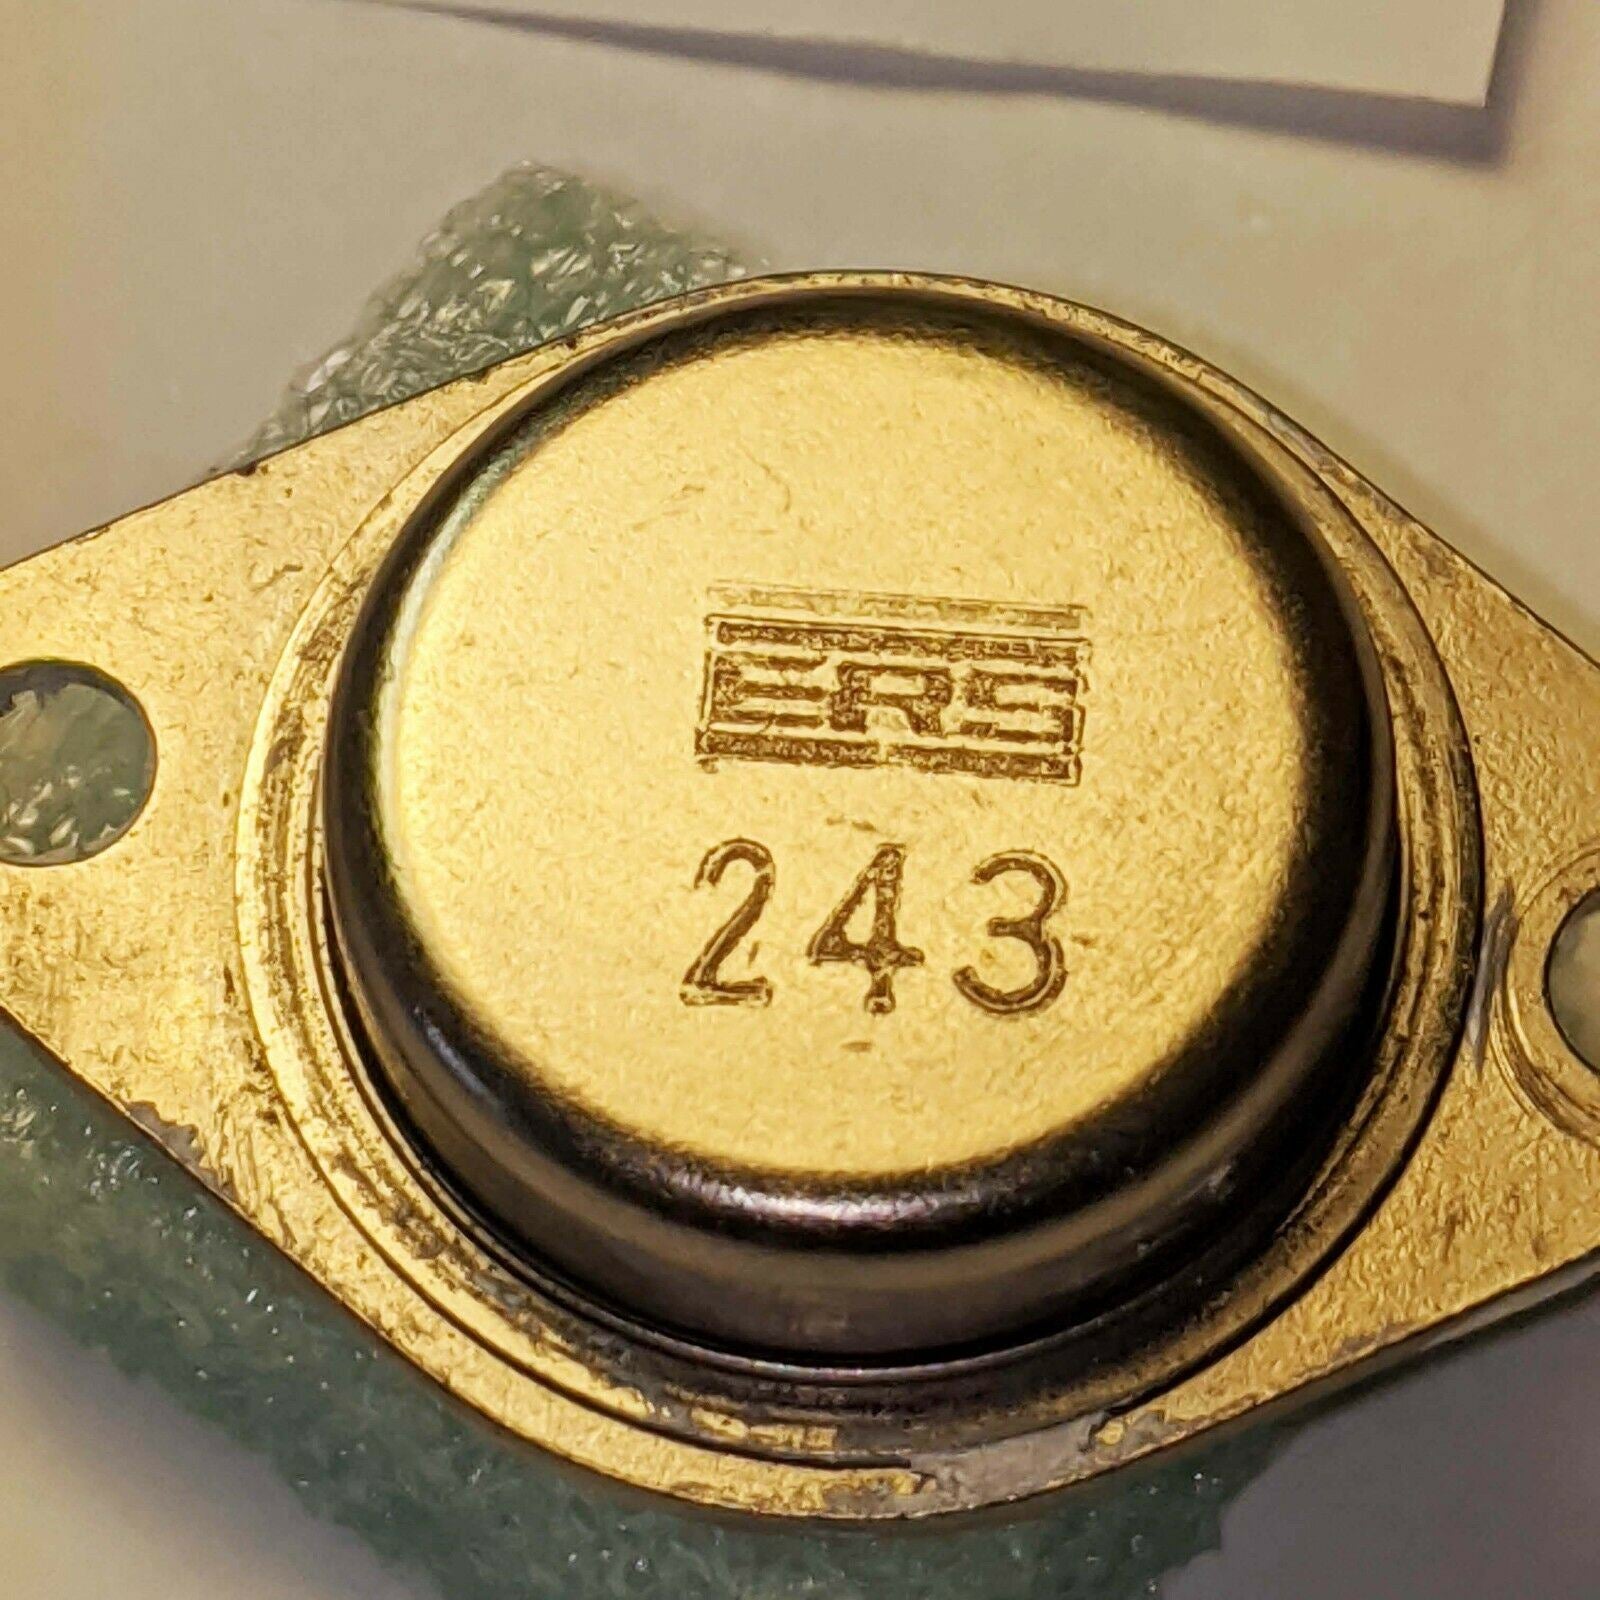 ERS243 POWER TRANSISTOR (NTE243, ECG243) Pullout